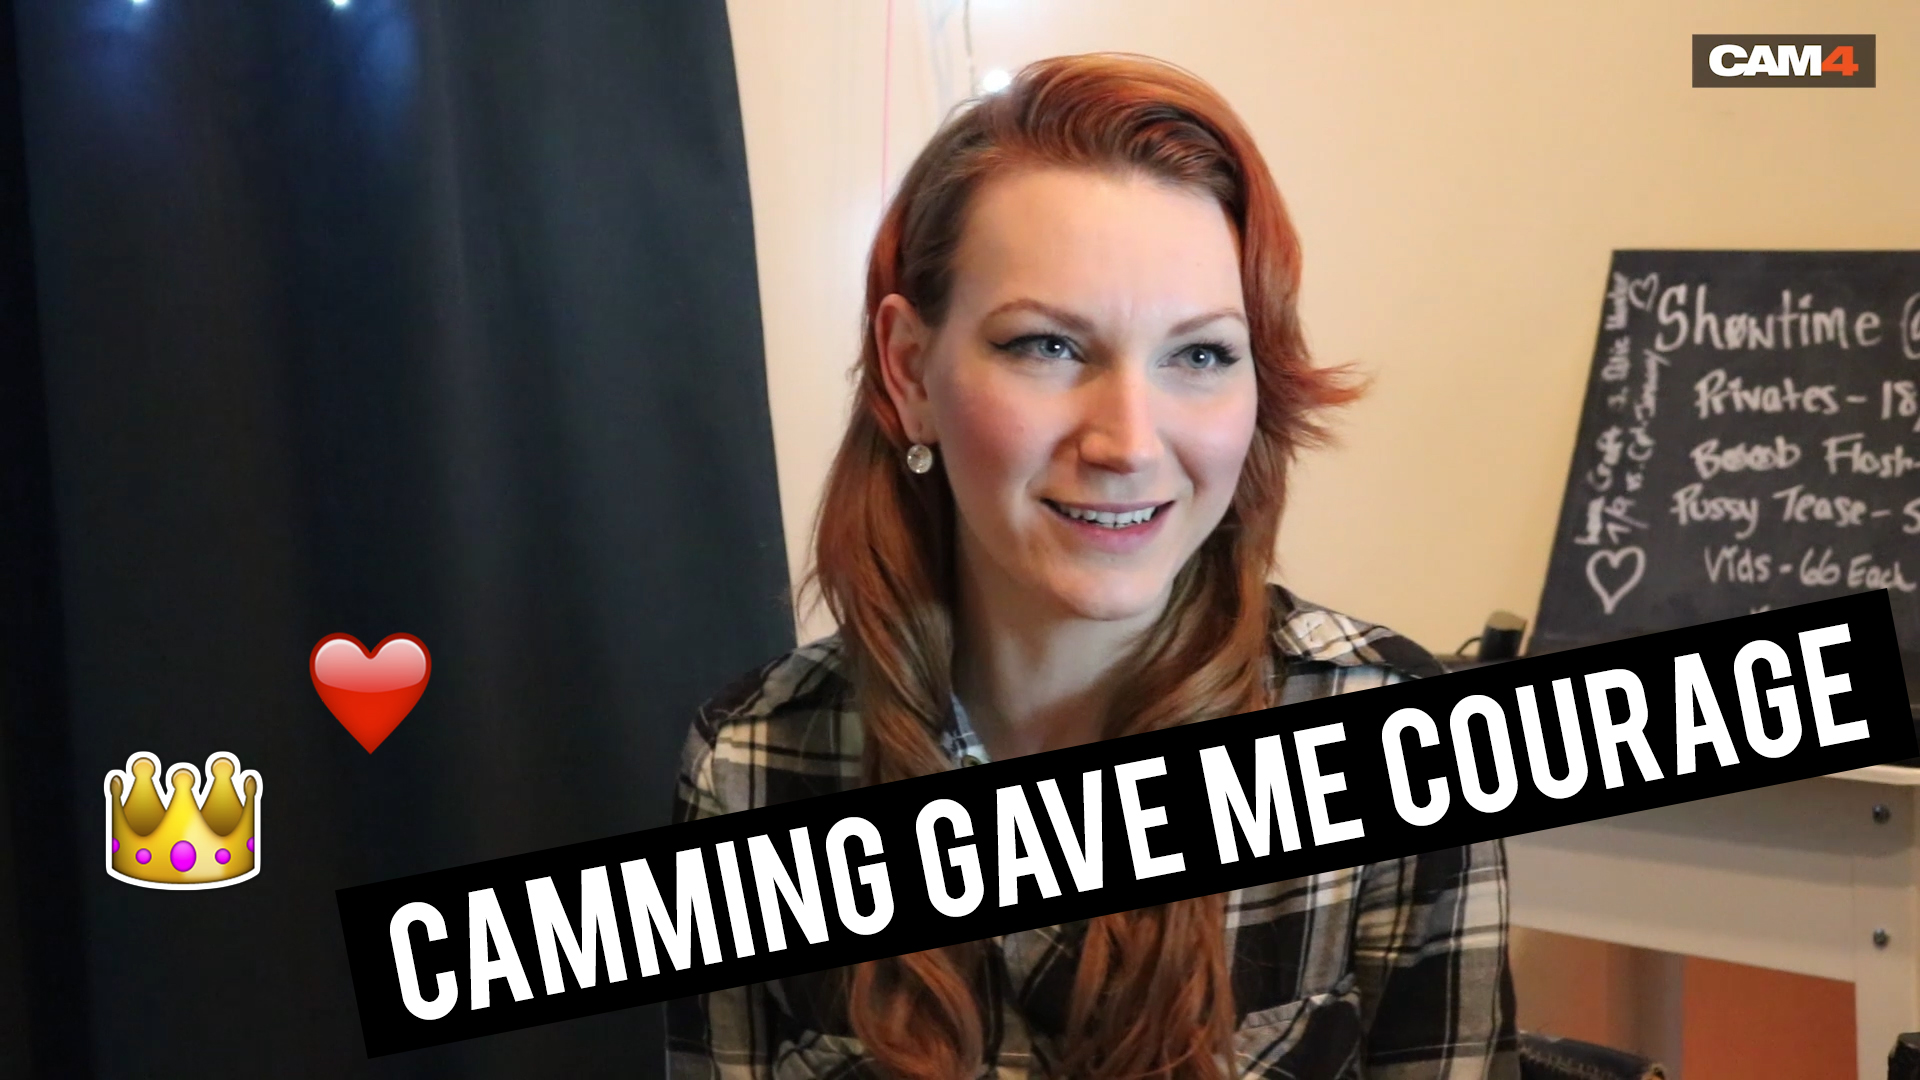 Caitie Rage: Camming Gave Me Courage